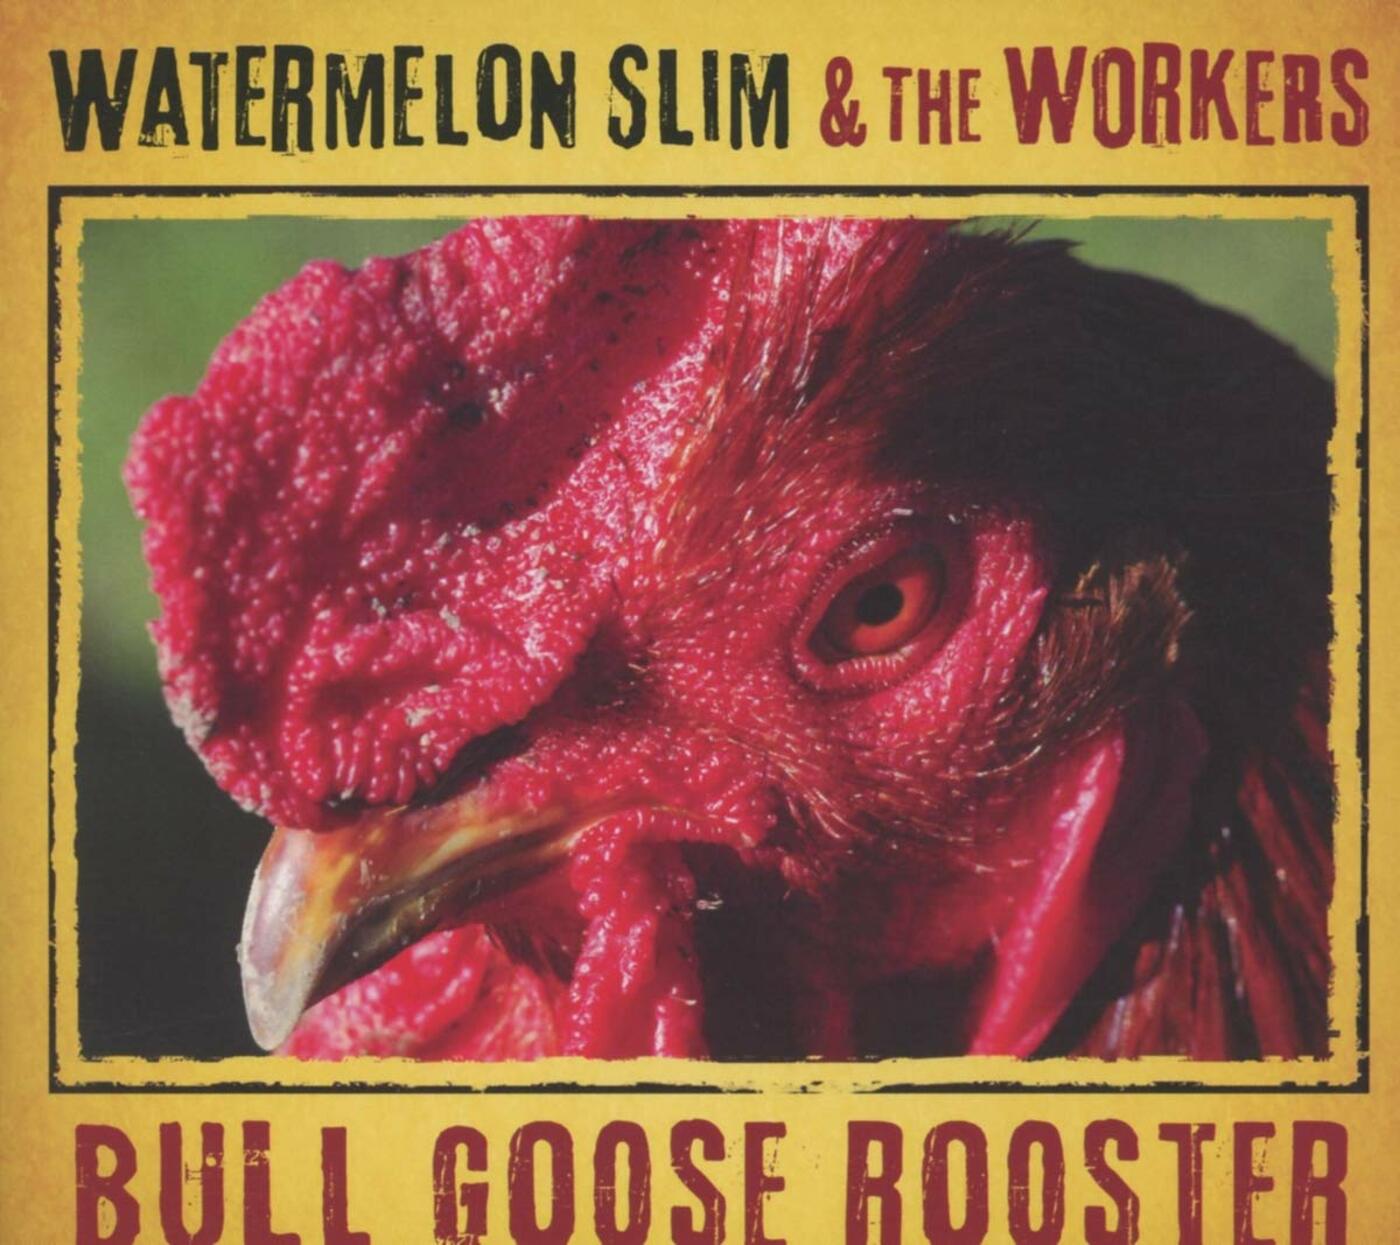 Watermelon Slim & The Workers | Bull Goose Rooster | CD